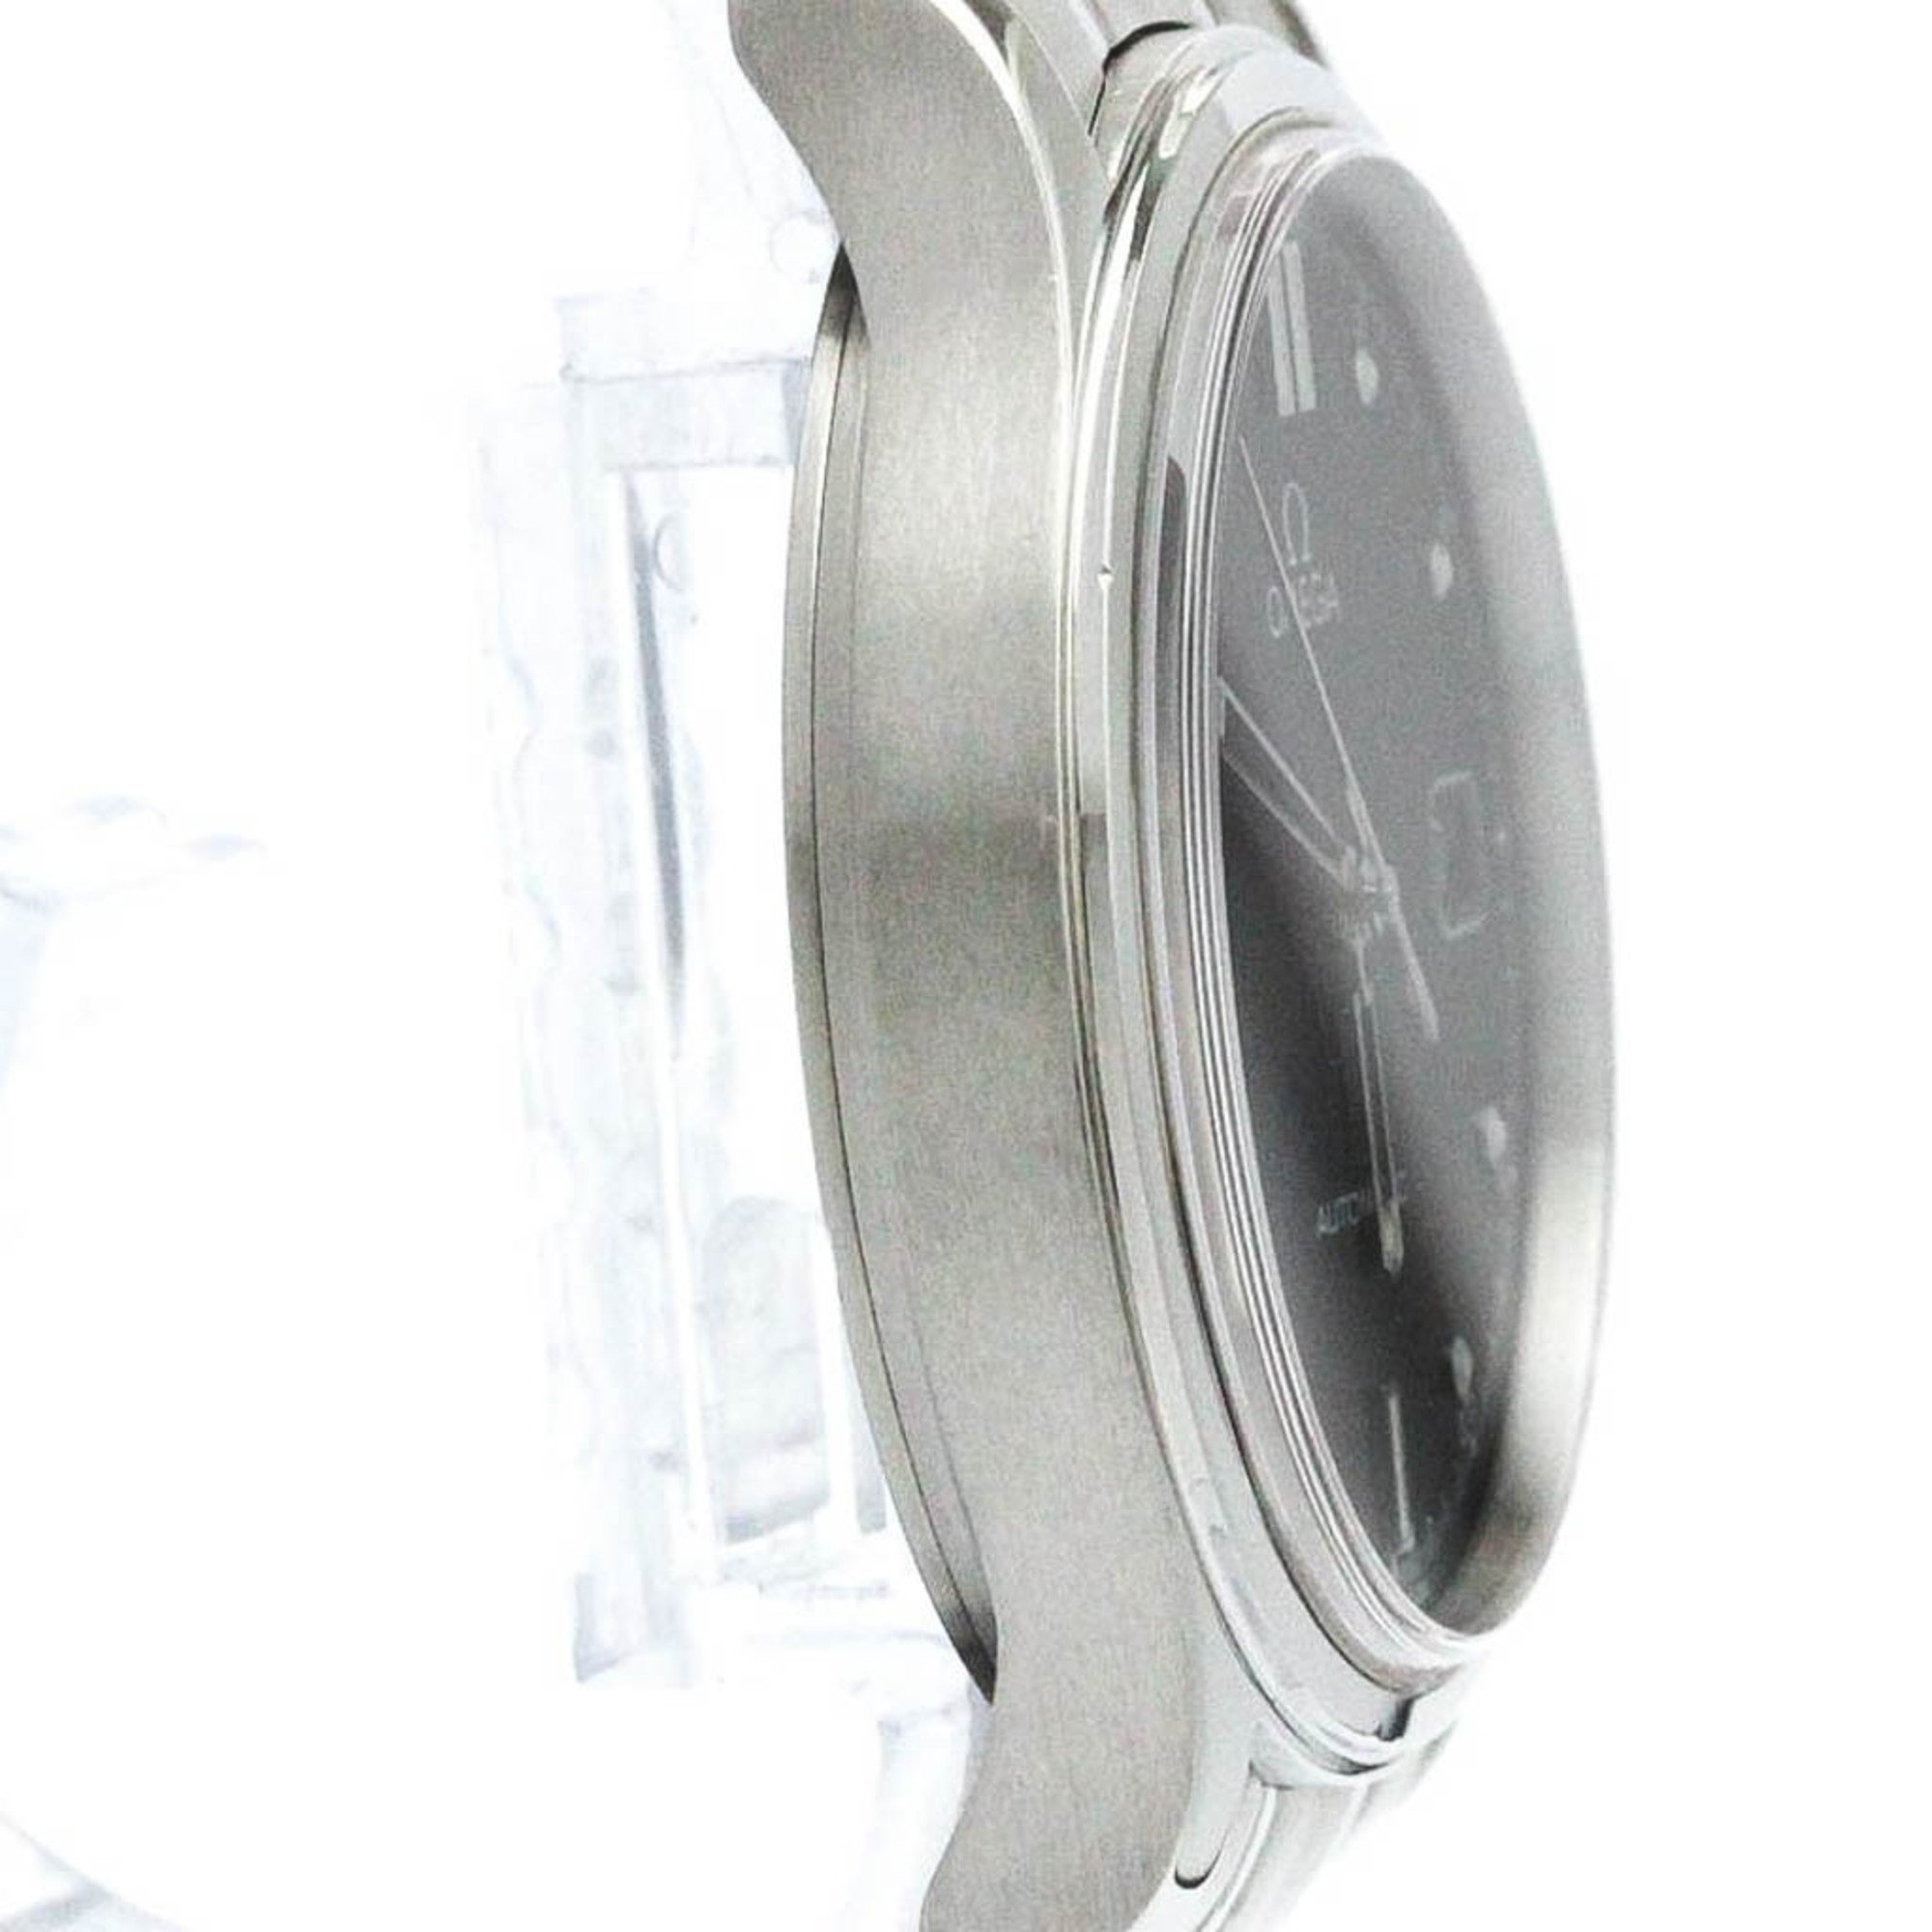 Polished OMEGA Classic Stainless Steel Automatic Mens Watch 5203.50 BF572565